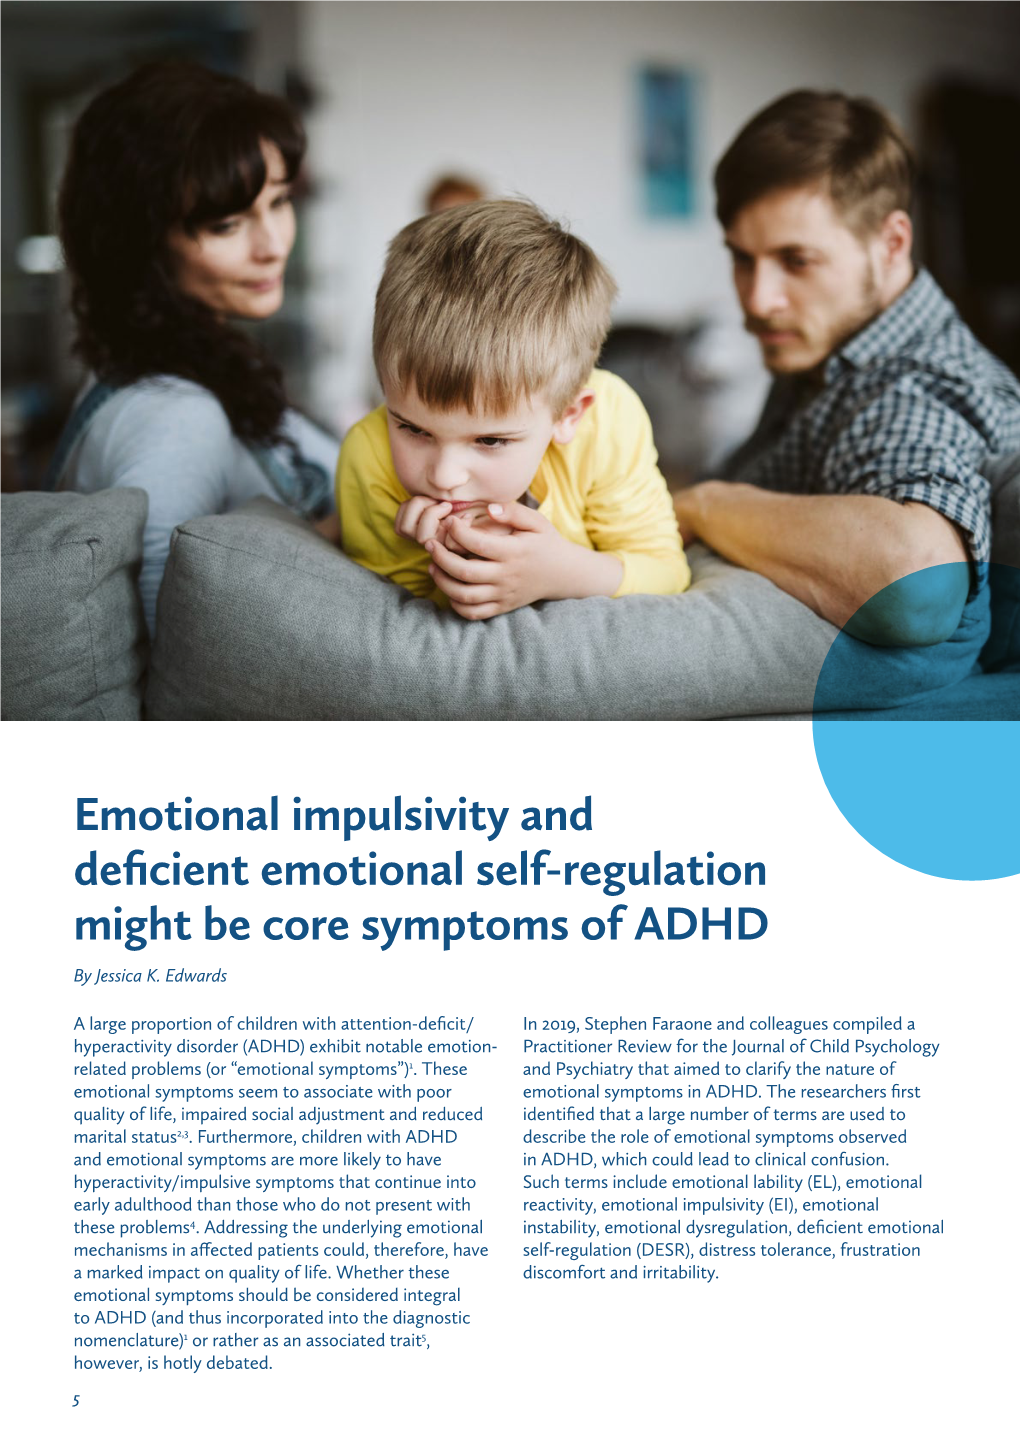 Emotional Impulsivity and Deficient Emotional Self-Regulation Might Be Core Symptoms of ADHD by Jessica K